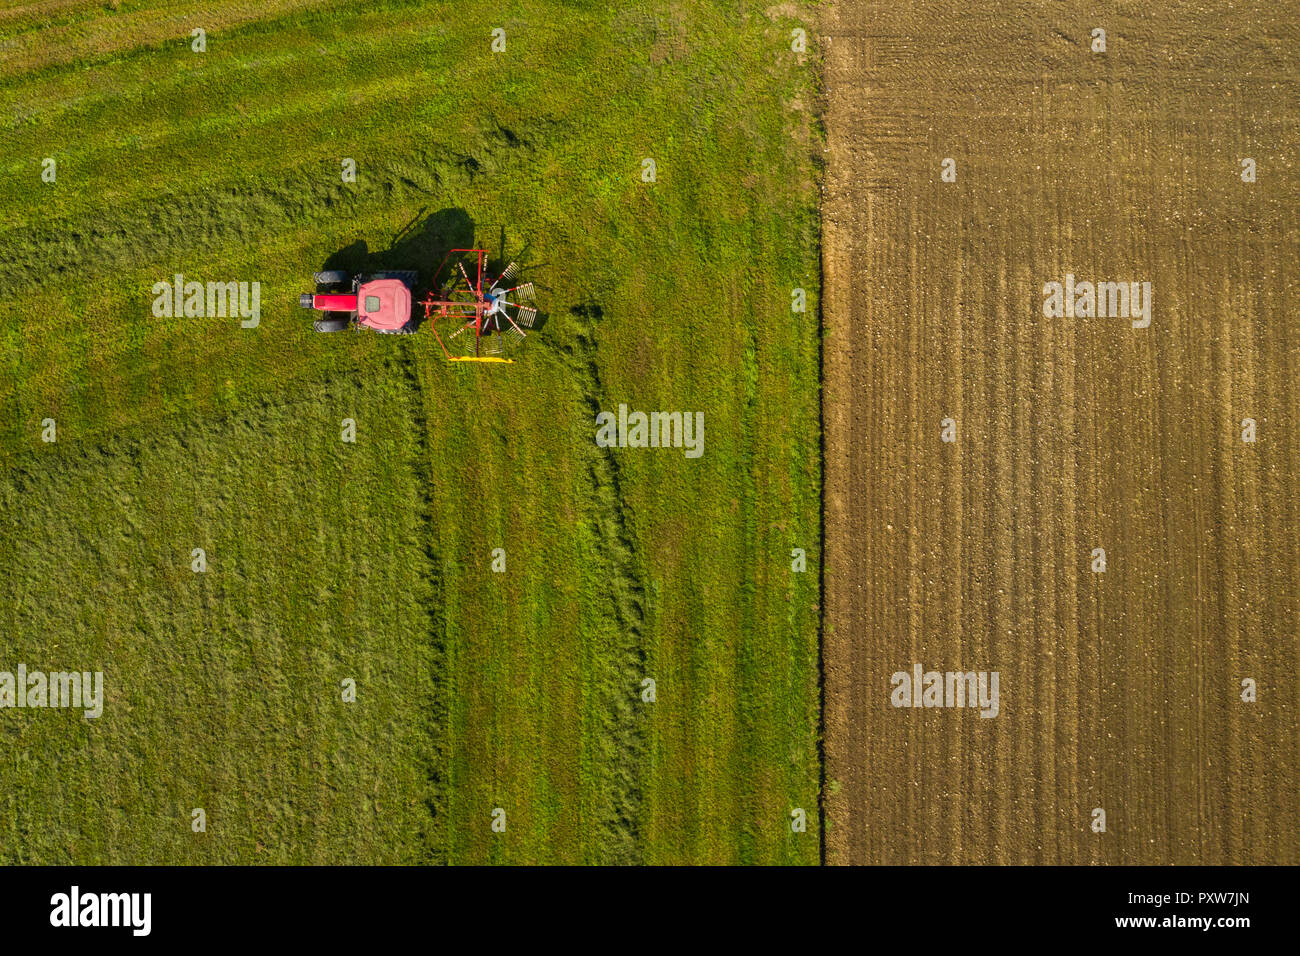 Top down aerial view of a red tractor cultivating farmland with a spinning blade in rural Slovenia Stock Photo